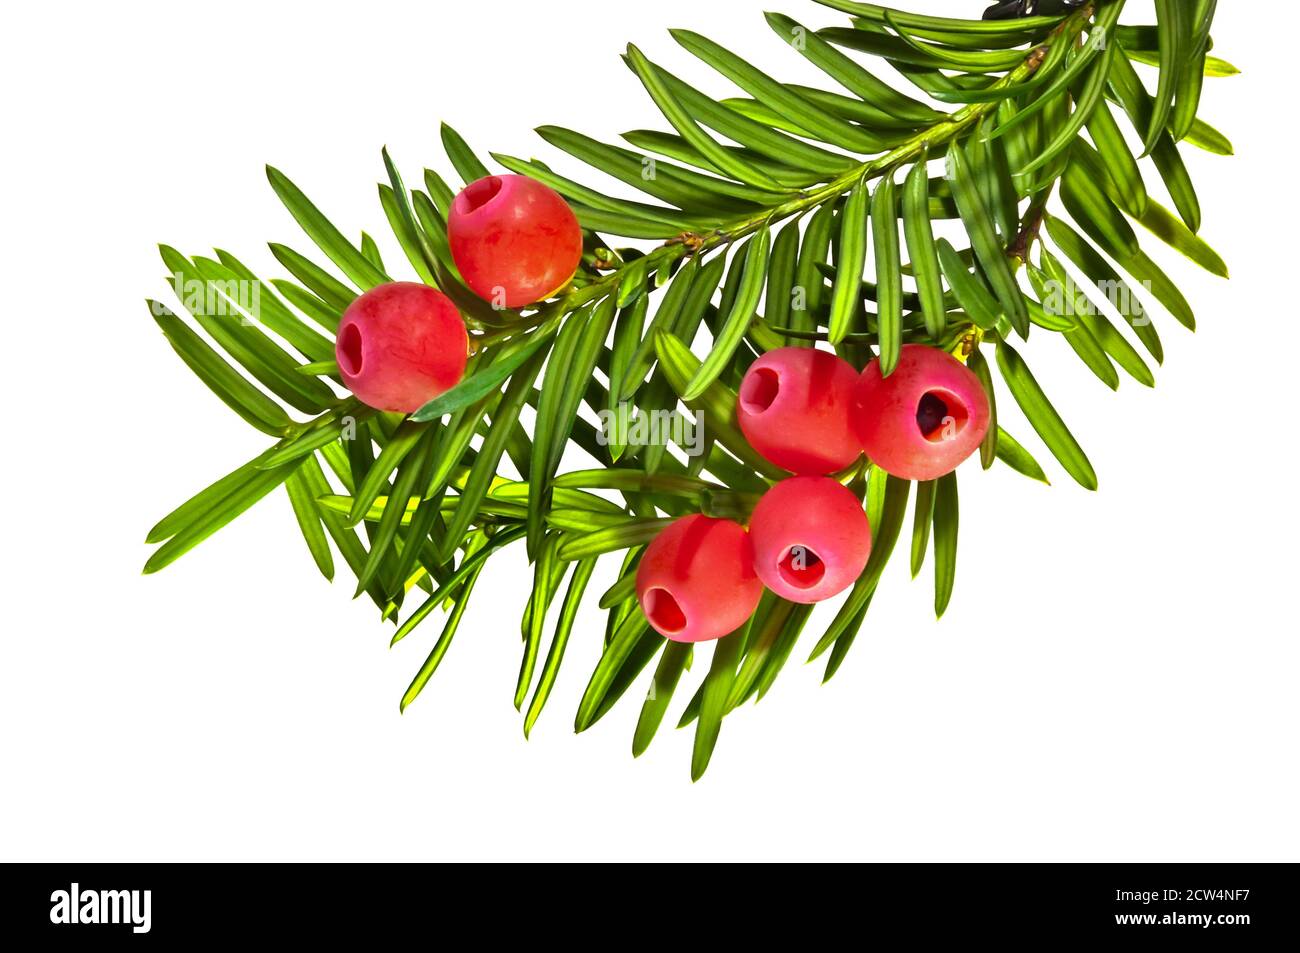 Yew twigs with red berries isolated Stock Photo